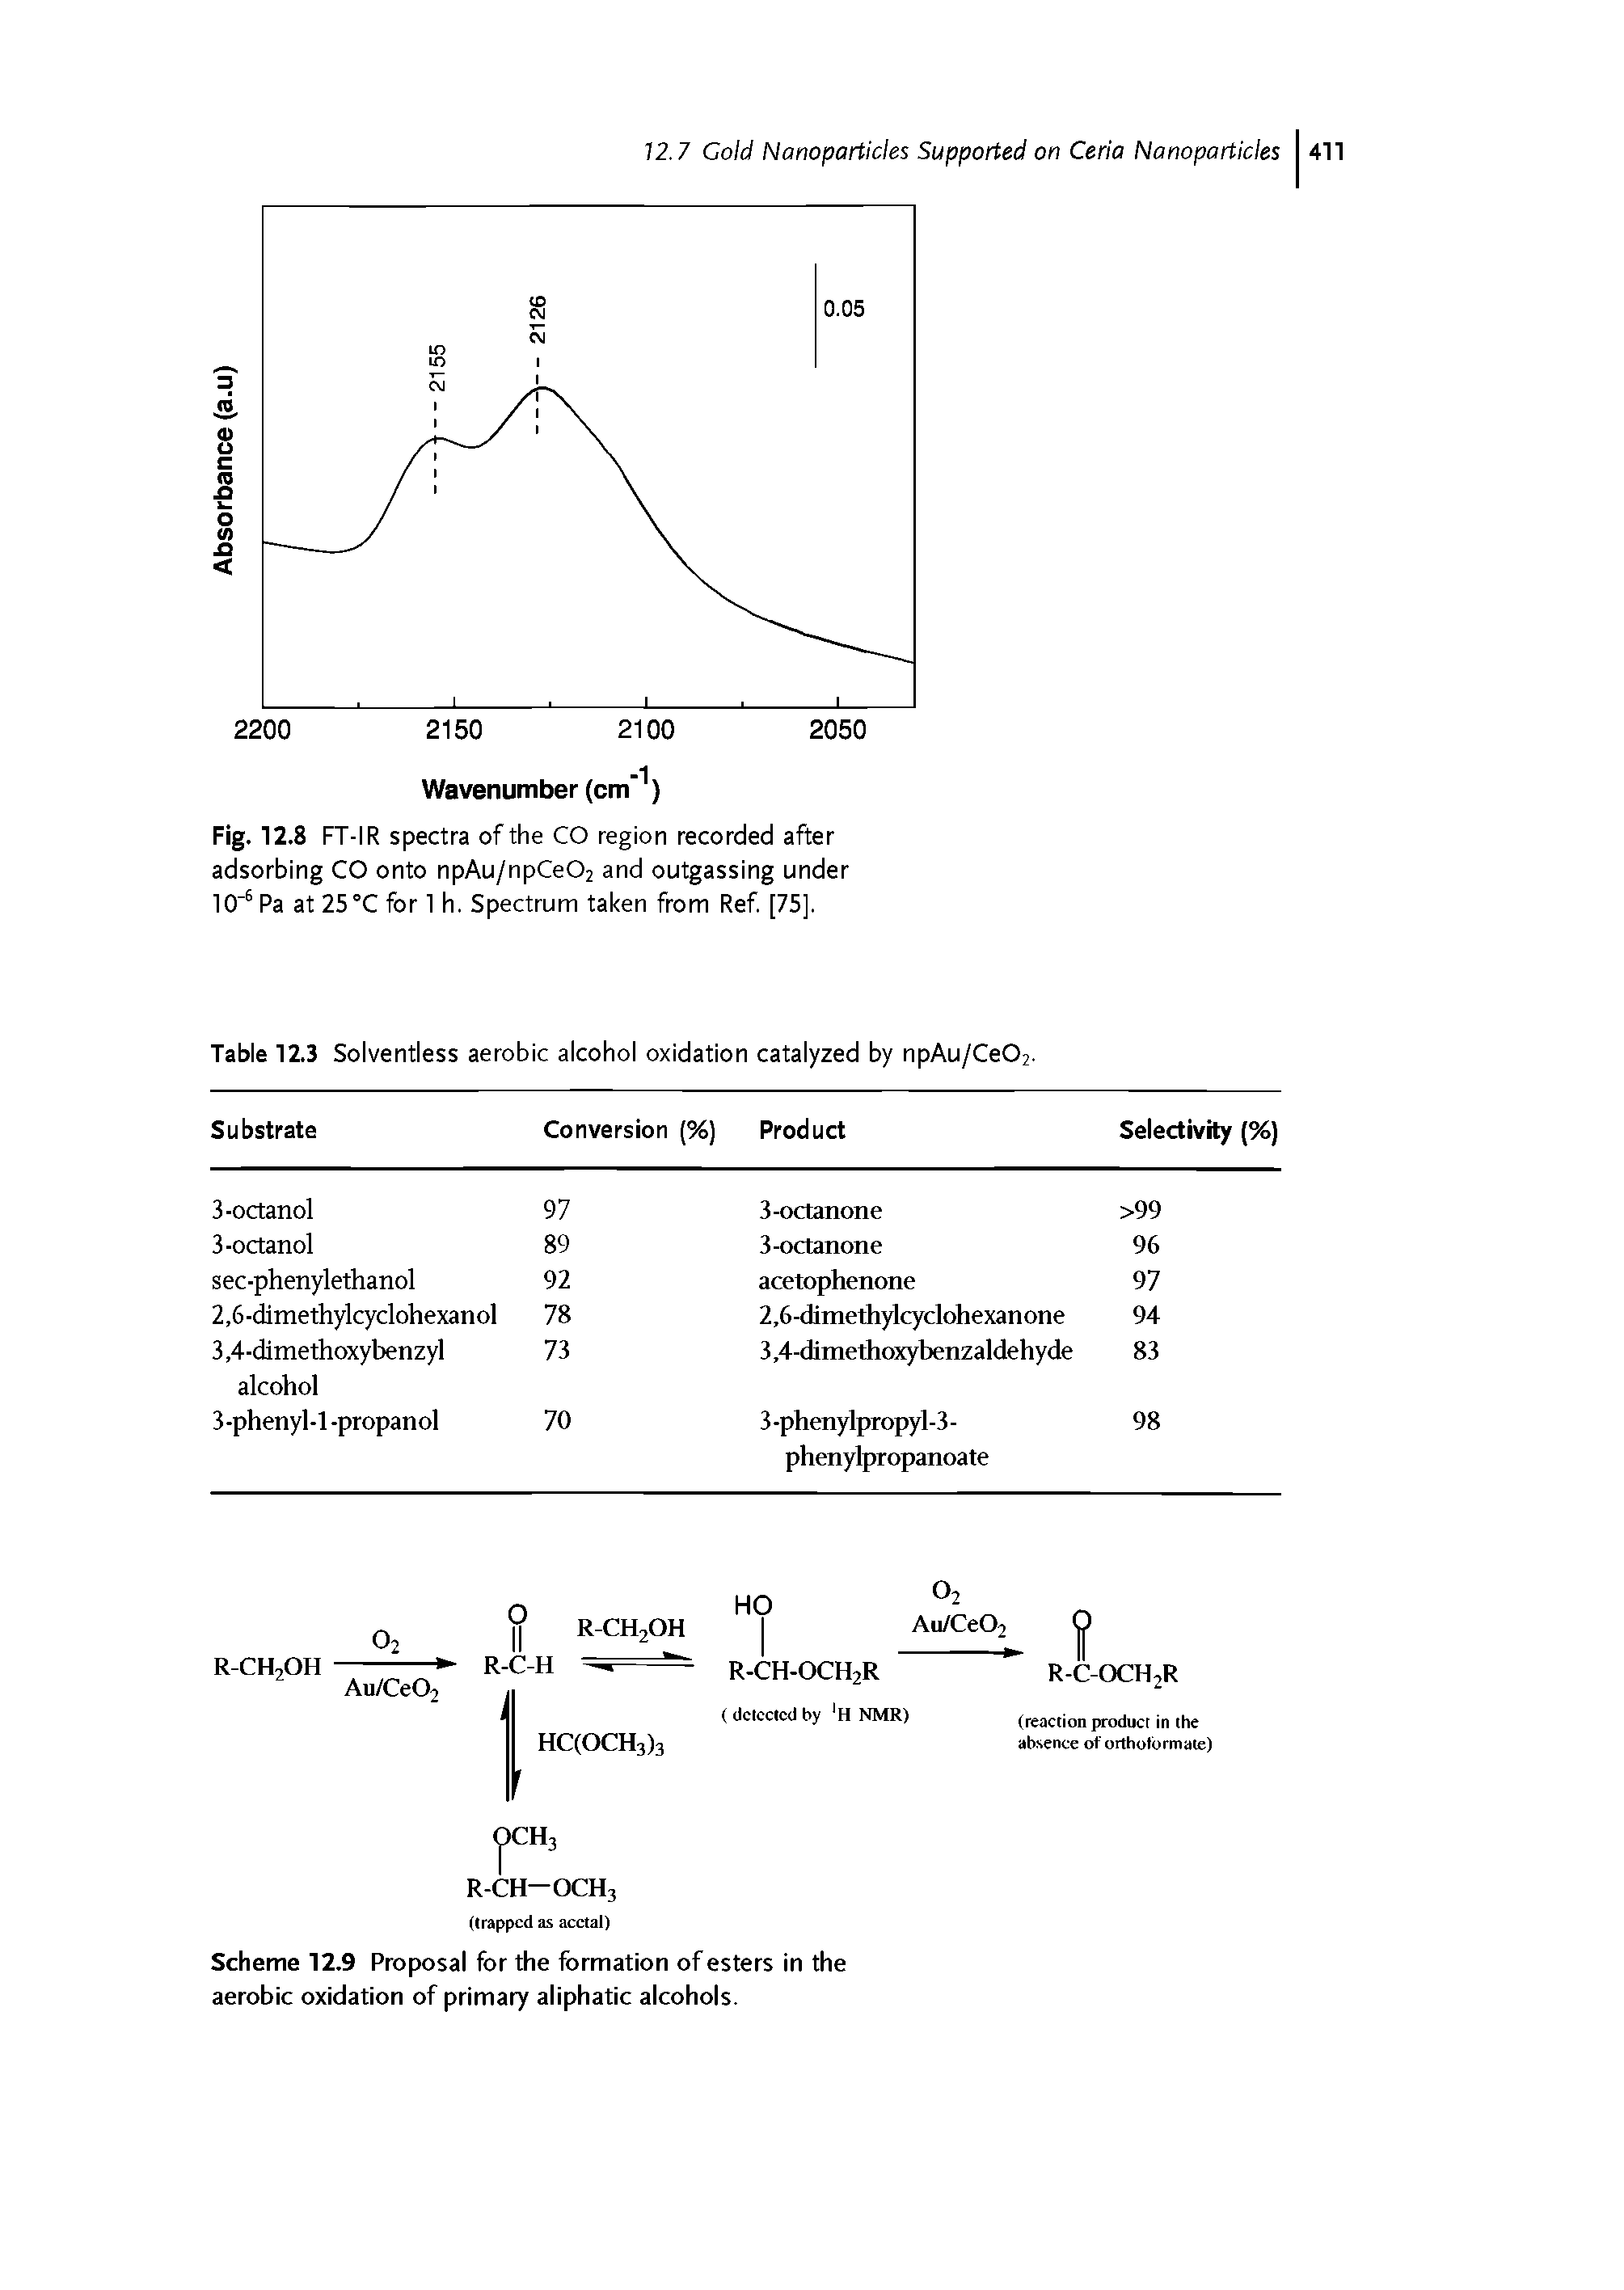 Scheme 12.9 Proposal for the formation of esters in the aerobic oxidation of primary aliphatic alcohols.